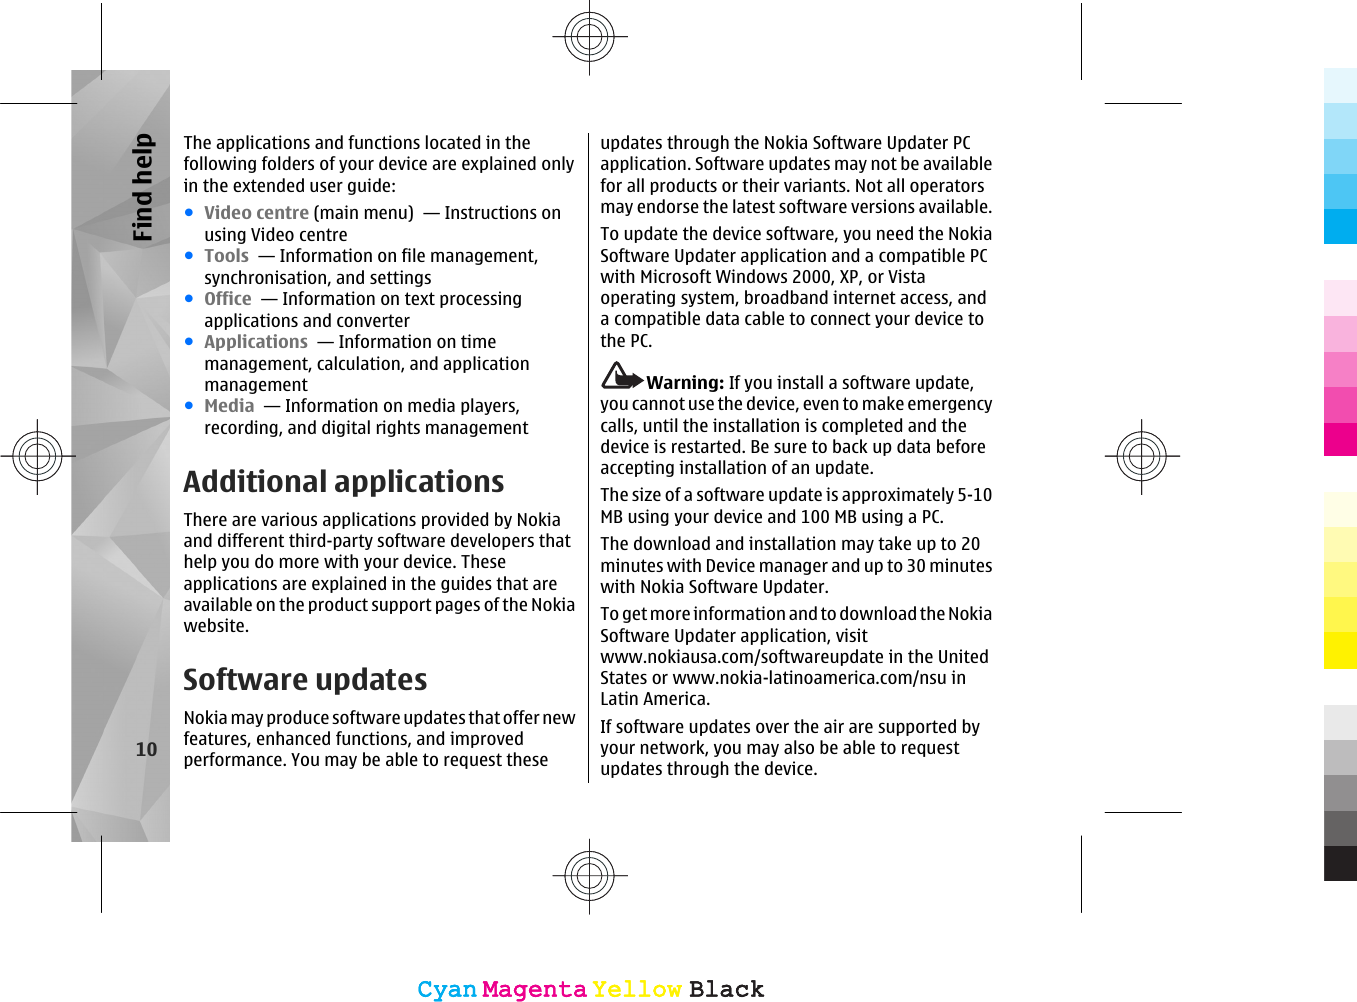 The applications and functions located in thefollowing folders of your device are explained onlyin the extended user guide:●Video centre (main menu)  — Instructions onusing Video centre●Tools  — Information on file management,synchronisation, and settings●Office  — Information on text processingapplications and converter●Applications  — Information on timemanagement, calculation, and applicationmanagement●Media  — Information on media players,recording, and digital rights managementAdditional applicationsThere are various applications provided by Nokiaand different third-party software developers thathelp you do more with your device. Theseapplications are explained in the guides that areavailable on the product support pages of the Nokiawebsite.Software updatesNokia may produce software updates that offer newfeatures, enhanced functions, and improvedperformance. You may be able to request theseupdates through the Nokia Software Updater PCapplication. Software updates may not be availablefor all products or their variants. Not all operatorsmay endorse the latest software versions available.To update the device software, you need the NokiaSoftware Updater application and a compatible PCwith Microsoft Windows 2000, XP, or Vistaoperating system, broadband internet access, anda compatible data cable to connect your device tothe PC.Warning: If you install a software update,you cannot use the device, even to make emergencycalls, until the installation is completed and thedevice is restarted. Be sure to back up data beforeaccepting installation of an update.The size of a software update is approximately 5-10MB using your device and 100 MB using a PC.The download and installation may take up to 20minutes with Device manager and up to 30 minuteswith Nokia Software Updater.To get more information and to download the NokiaSoftware Updater application, visitwww.nokiausa.com/softwareupdate in the UnitedStates or www.nokia-latinoamerica.com/nsu inLatin America.If software updates over the air are supported byyour network, you may also be able to requestupdates through the device.10Find helpCyanCyanMagentaMagentaYellowYellowBlackBlackCyanCyanMagentaMagentaYellowYellowBlackBlack